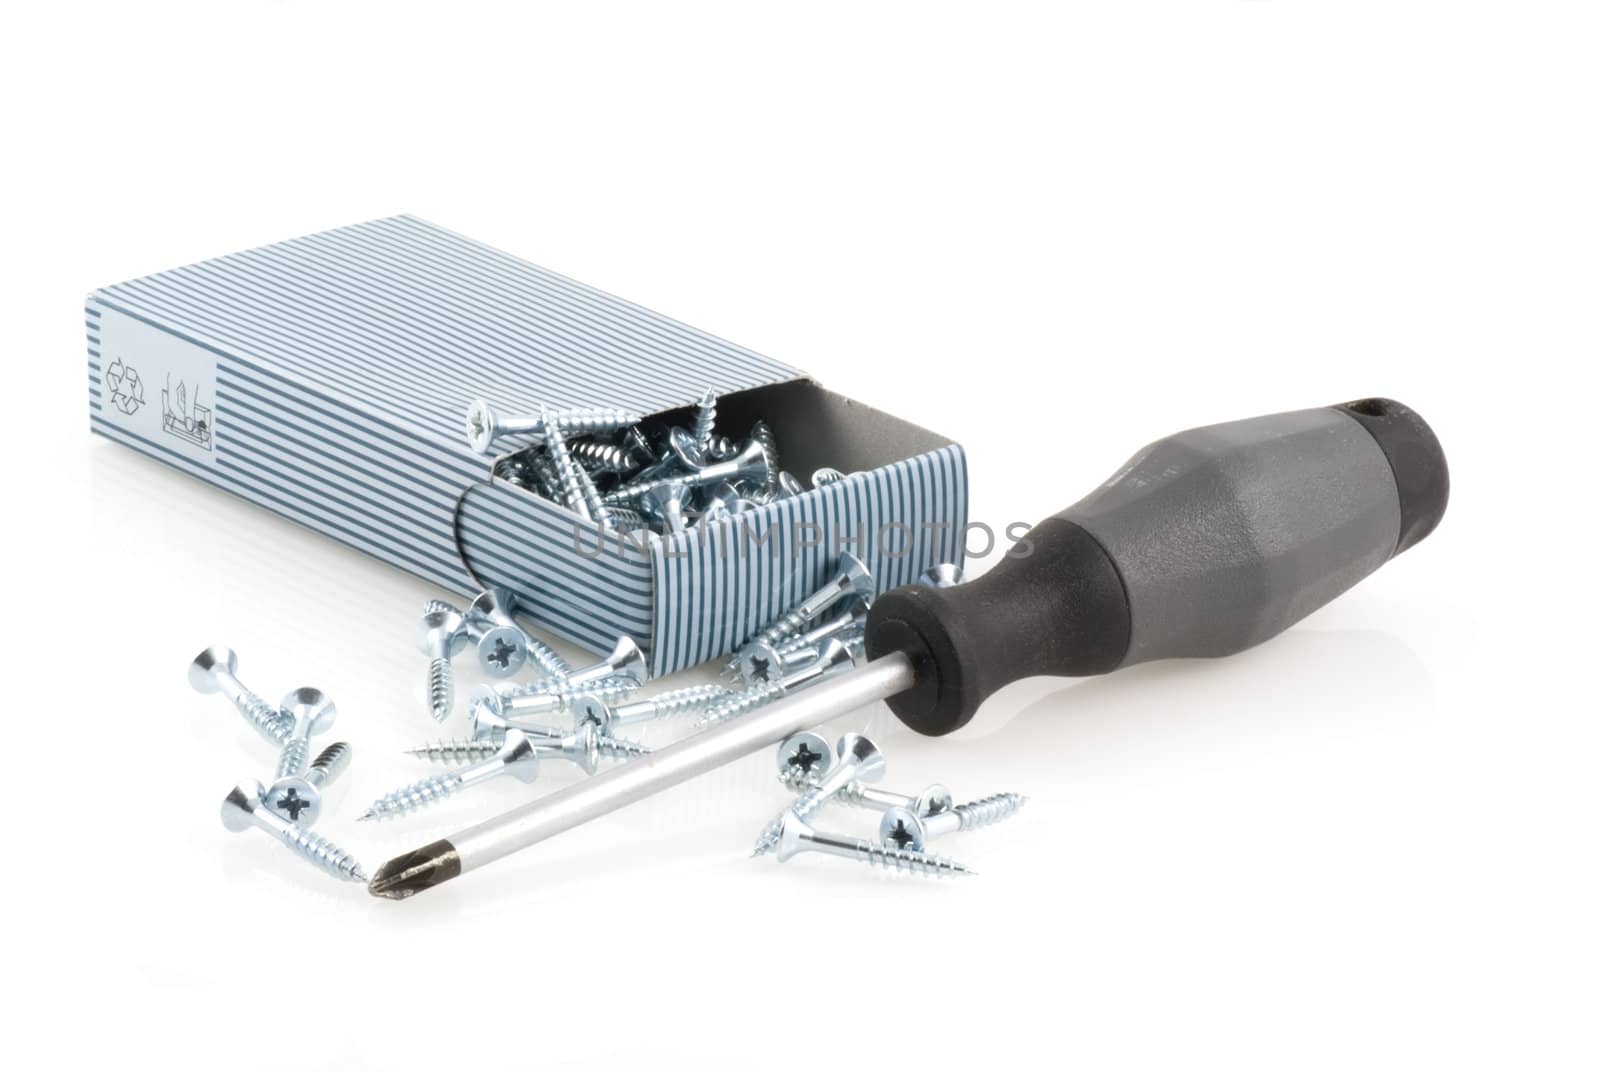 Screwdriver and box with screws isolated on a white background.